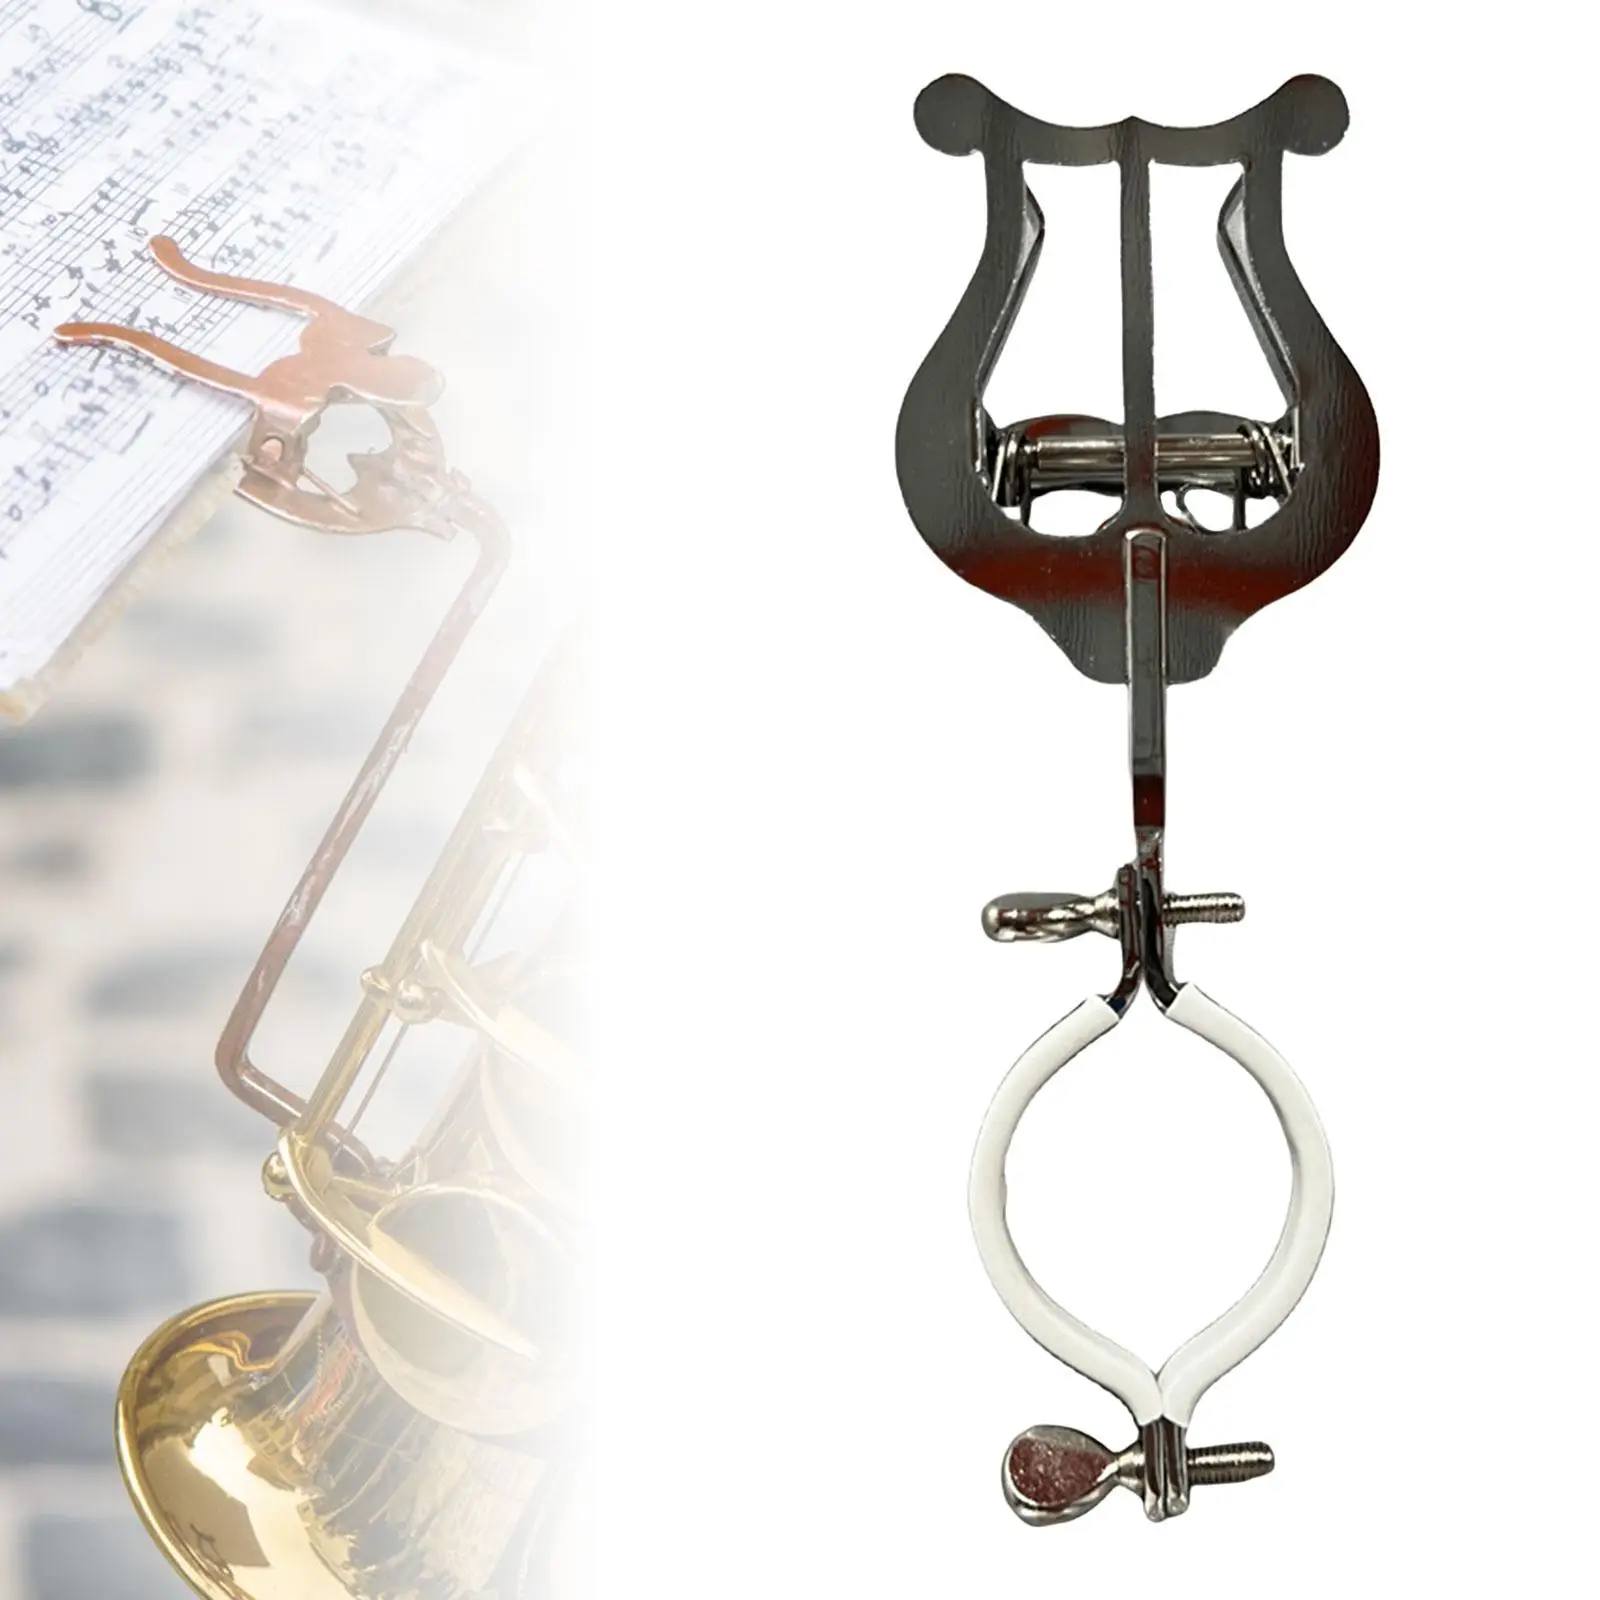 Trumpet Marching Lyre Trumpet Sheet Clip Holder Universal Metal Music Clip Stand for Trumpet Cornet Instruments Marching Band